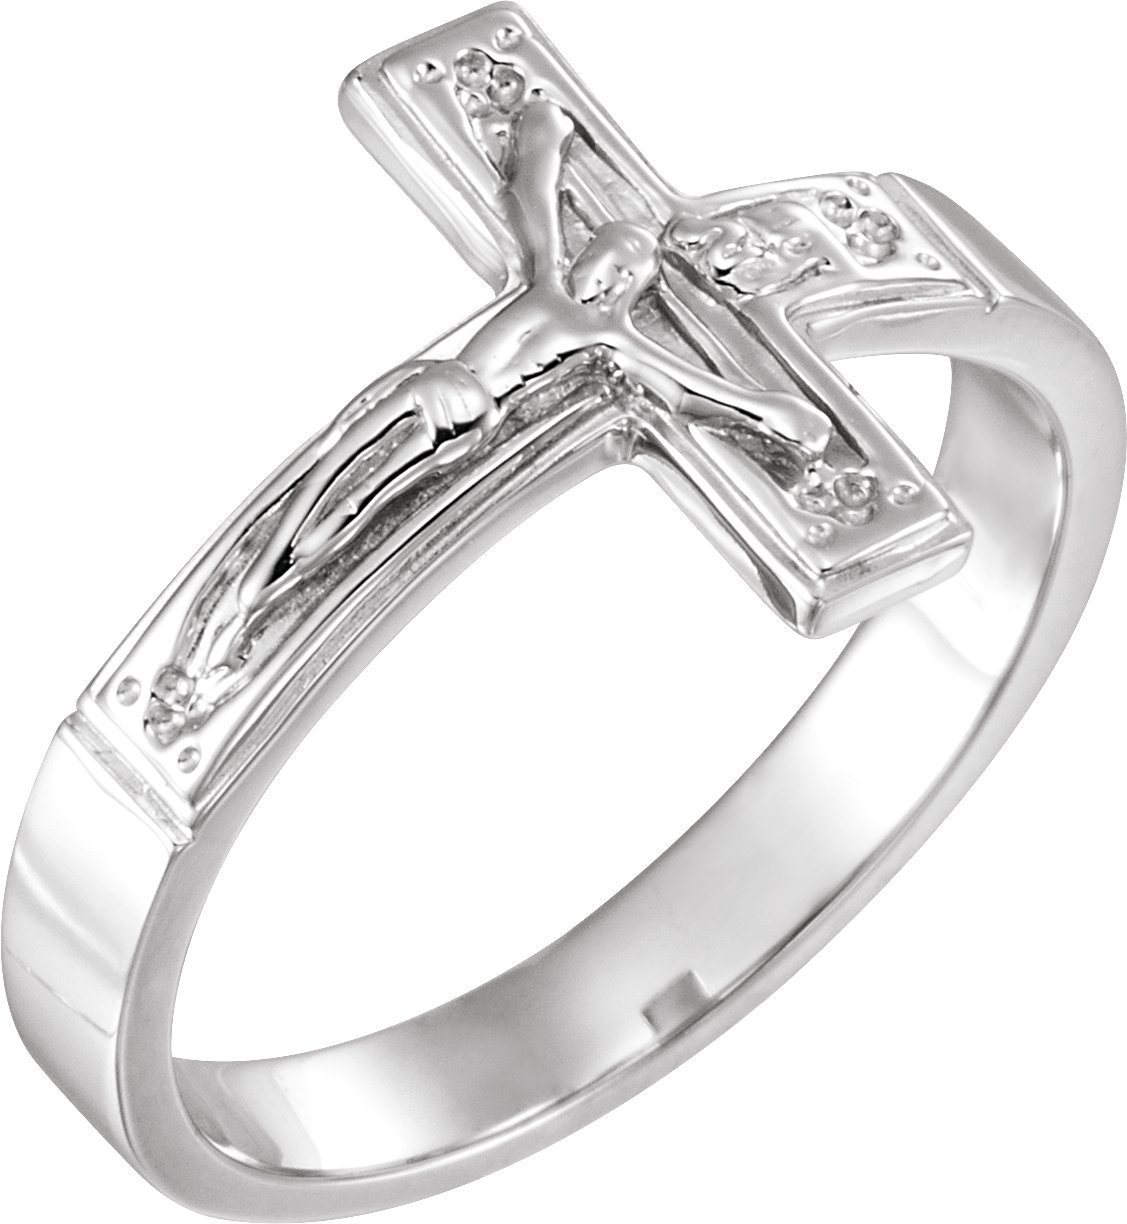 Sterling Silver 15 mm Crucifix Chastity Ring Size 12